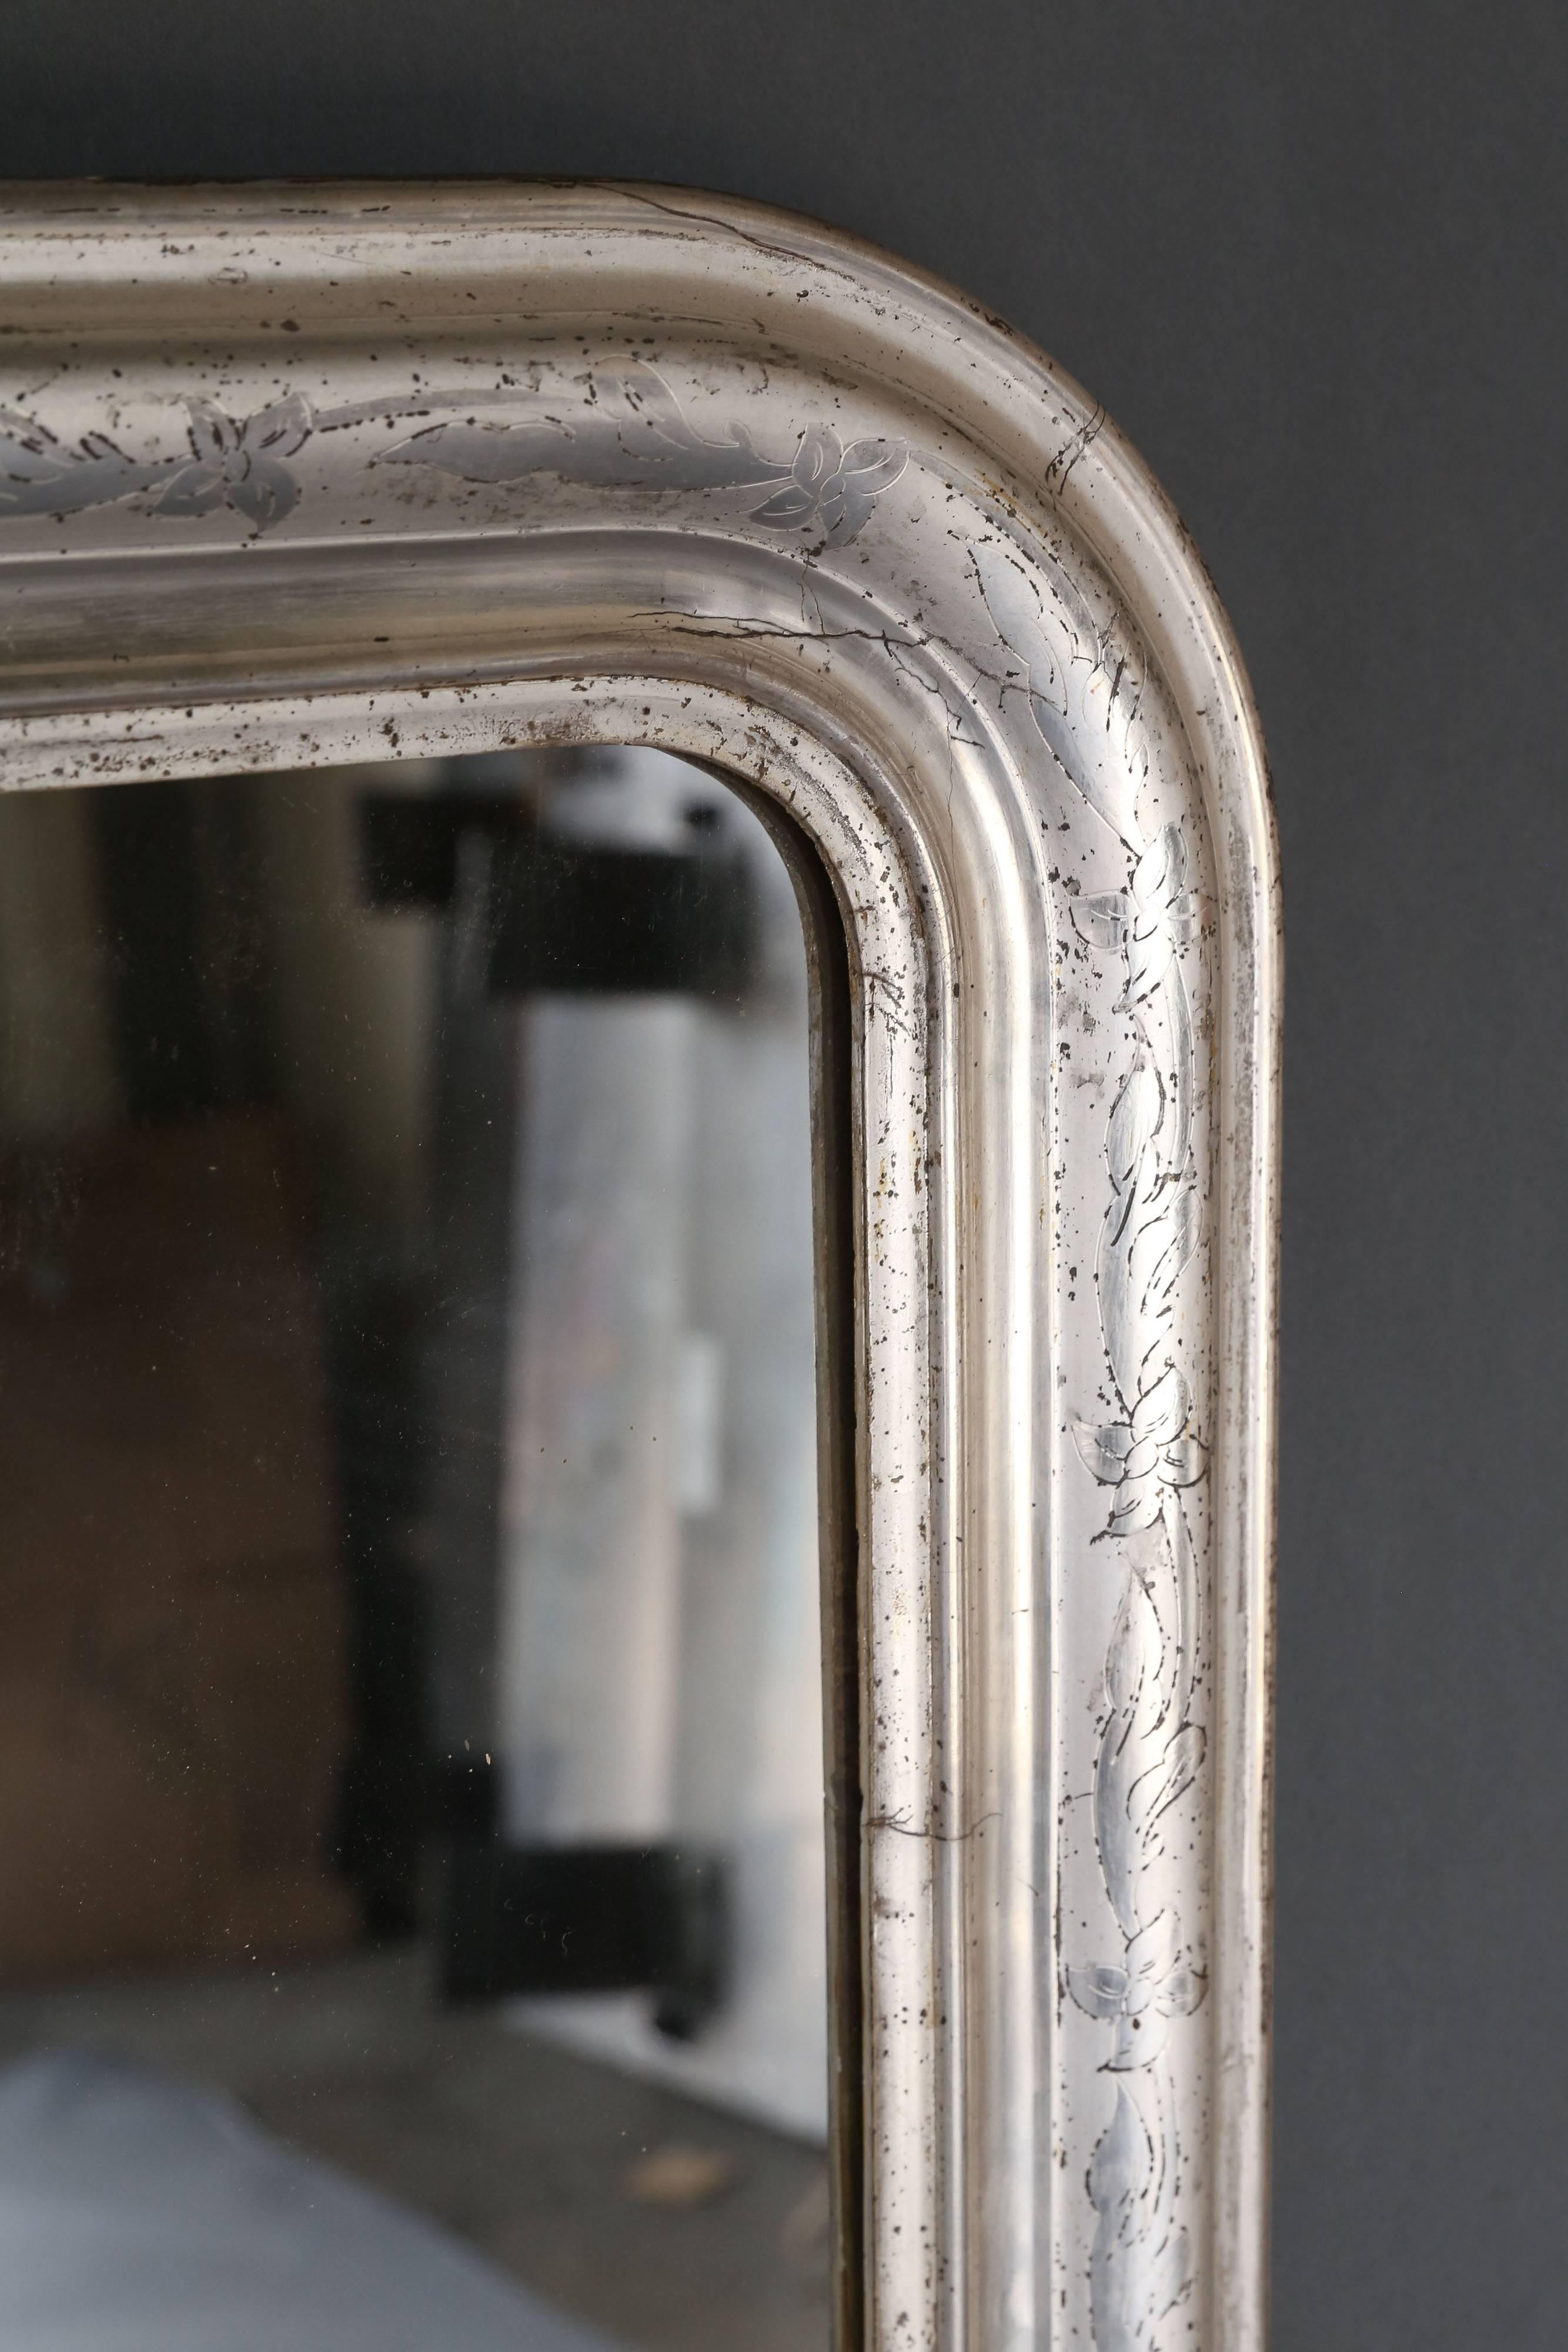 19th century Louis Philippe silver leaf mirror with etching around the perimeter. The top corners are rounded and the bottom corners are squared. Original mercury glass.